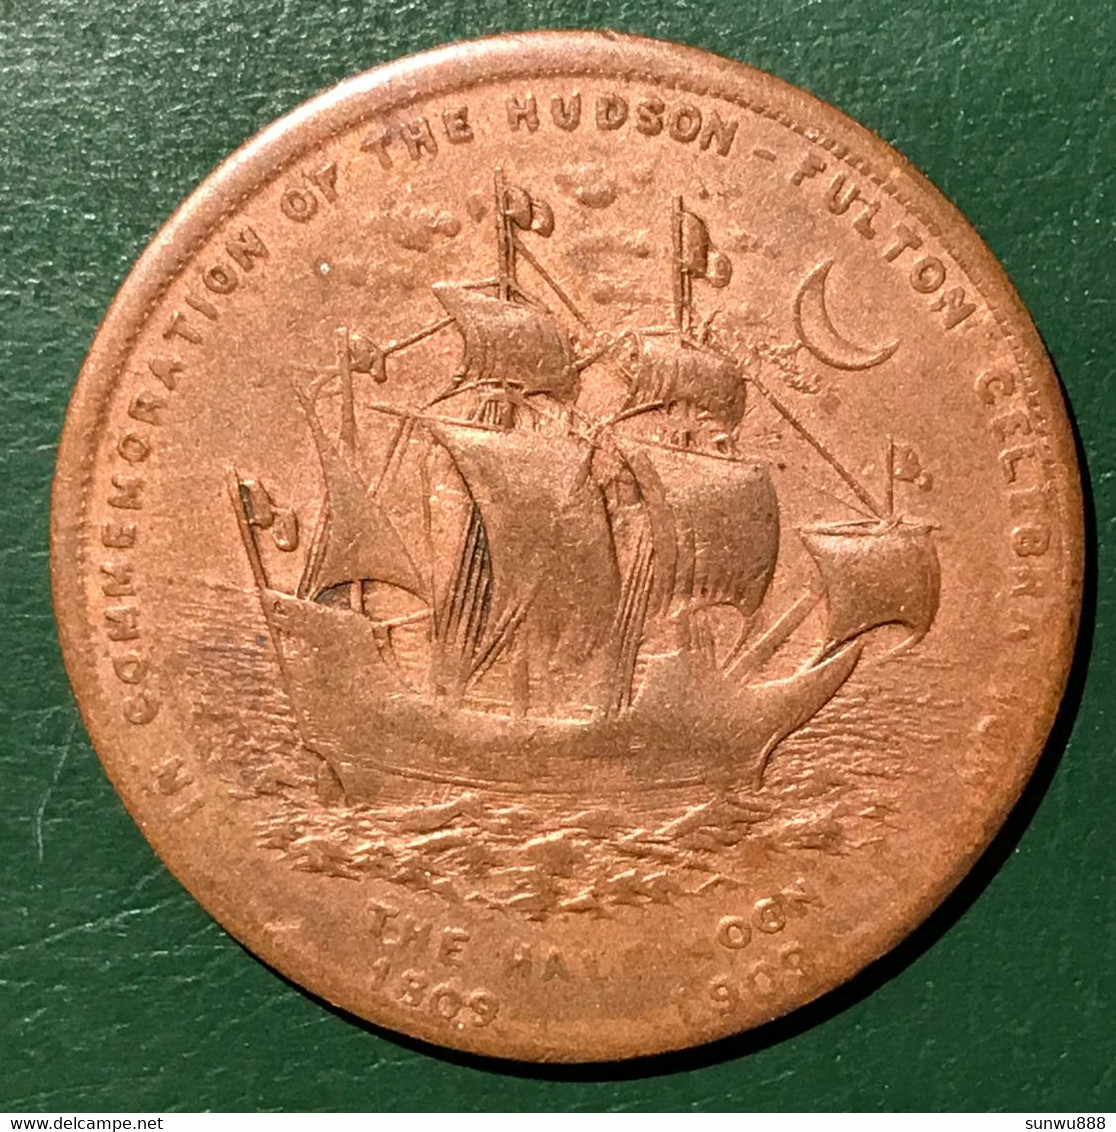 Hudson Fulton Celebration The Half Moon 1609-1909 New York Boat Medal Token RARE (fixed Price) - Professionals/Firms